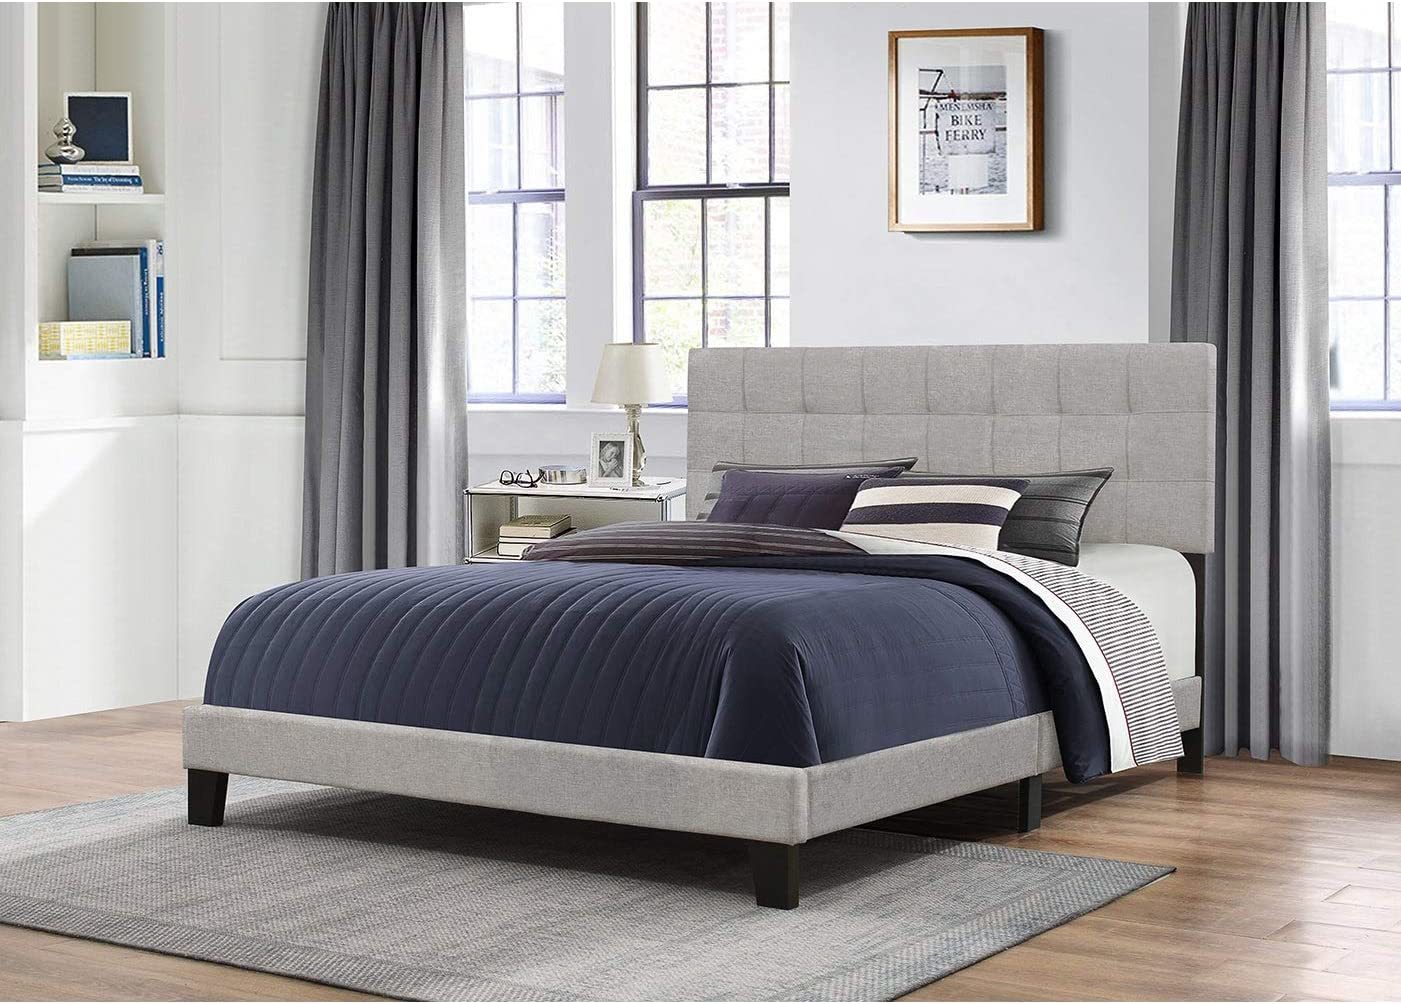 Primary image for Hillsdale Furniture Hillsdale Delaney, Full, Glacier Gray Fabric Bed In One